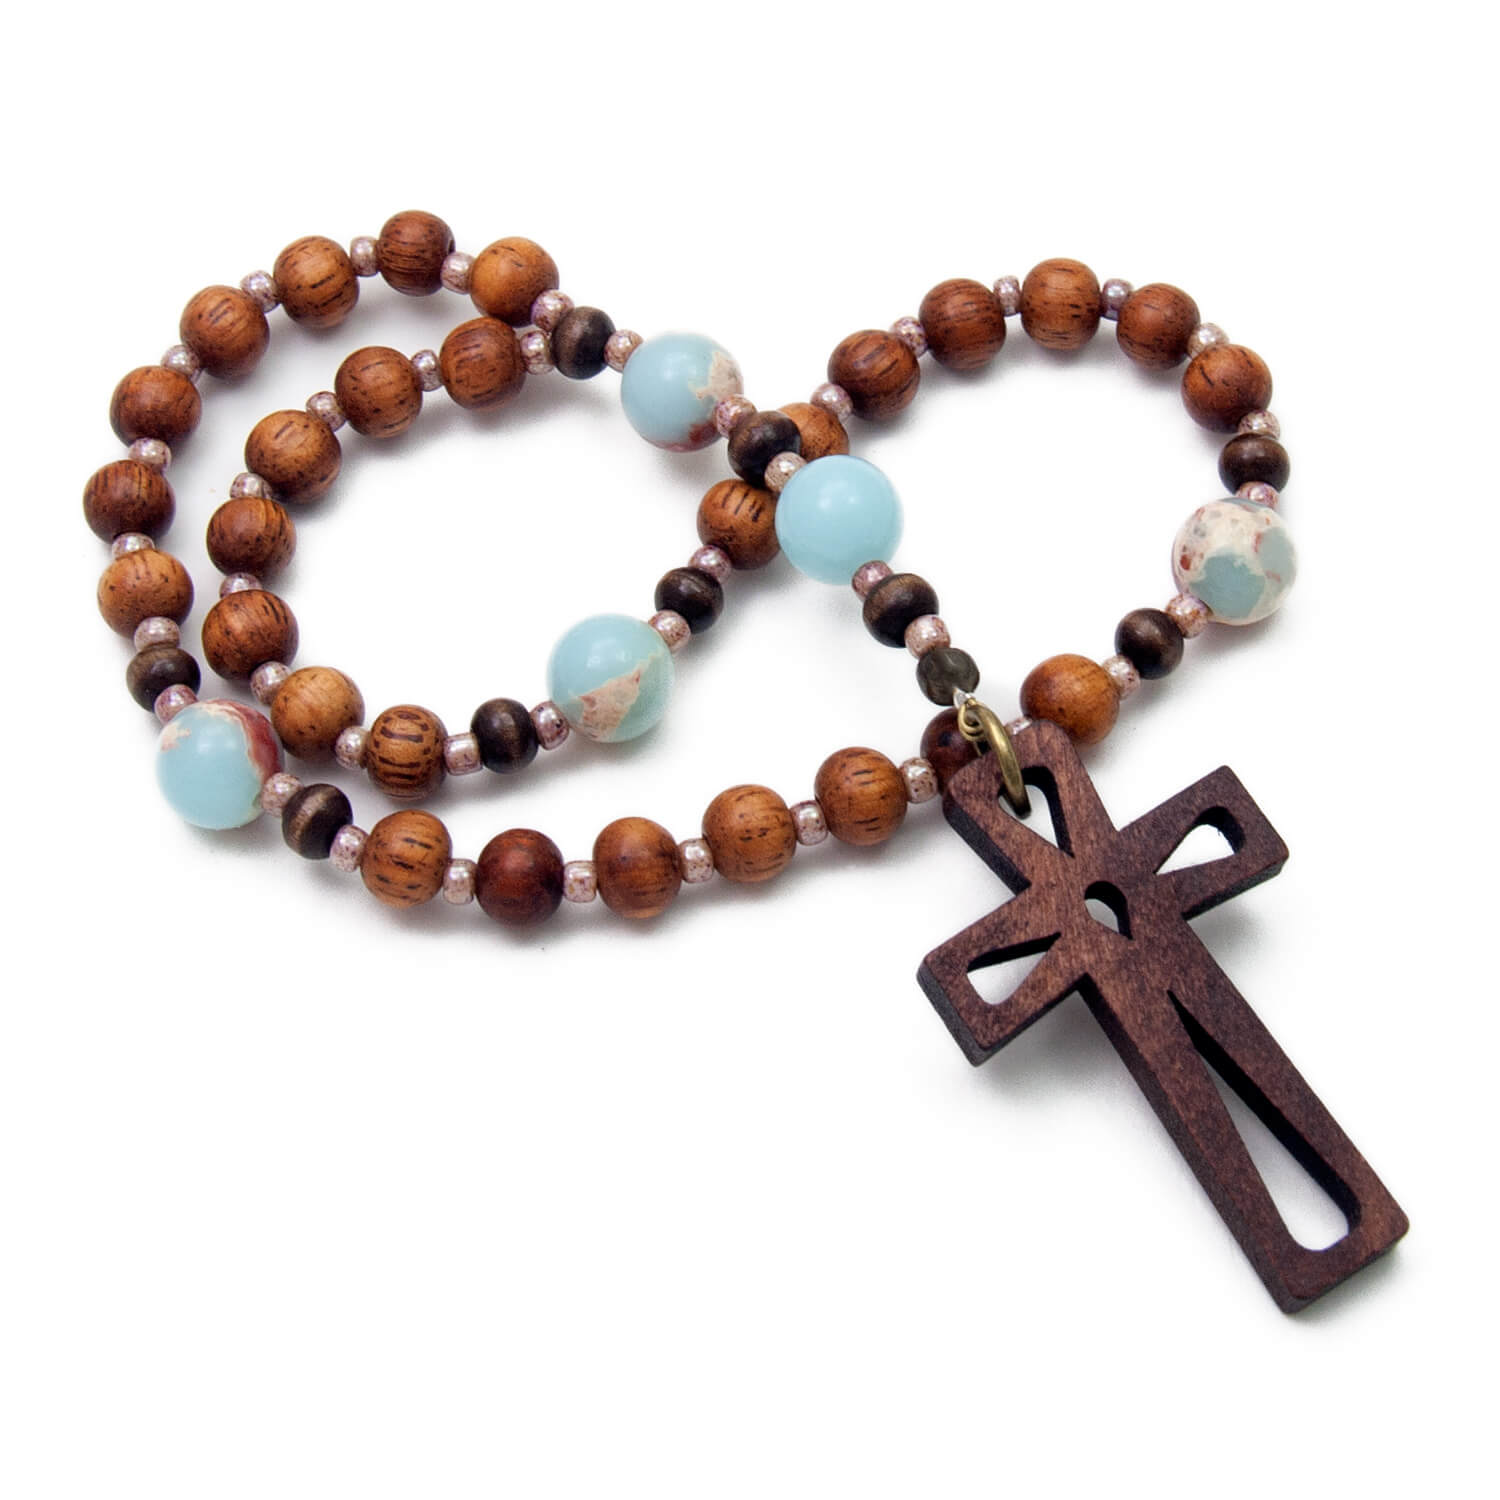 Amazon.com: Serenity Prayer Beads Anglican Style Turquoise Howlite with  Silver Beads and Stainless Steel Cross : Handmade Products